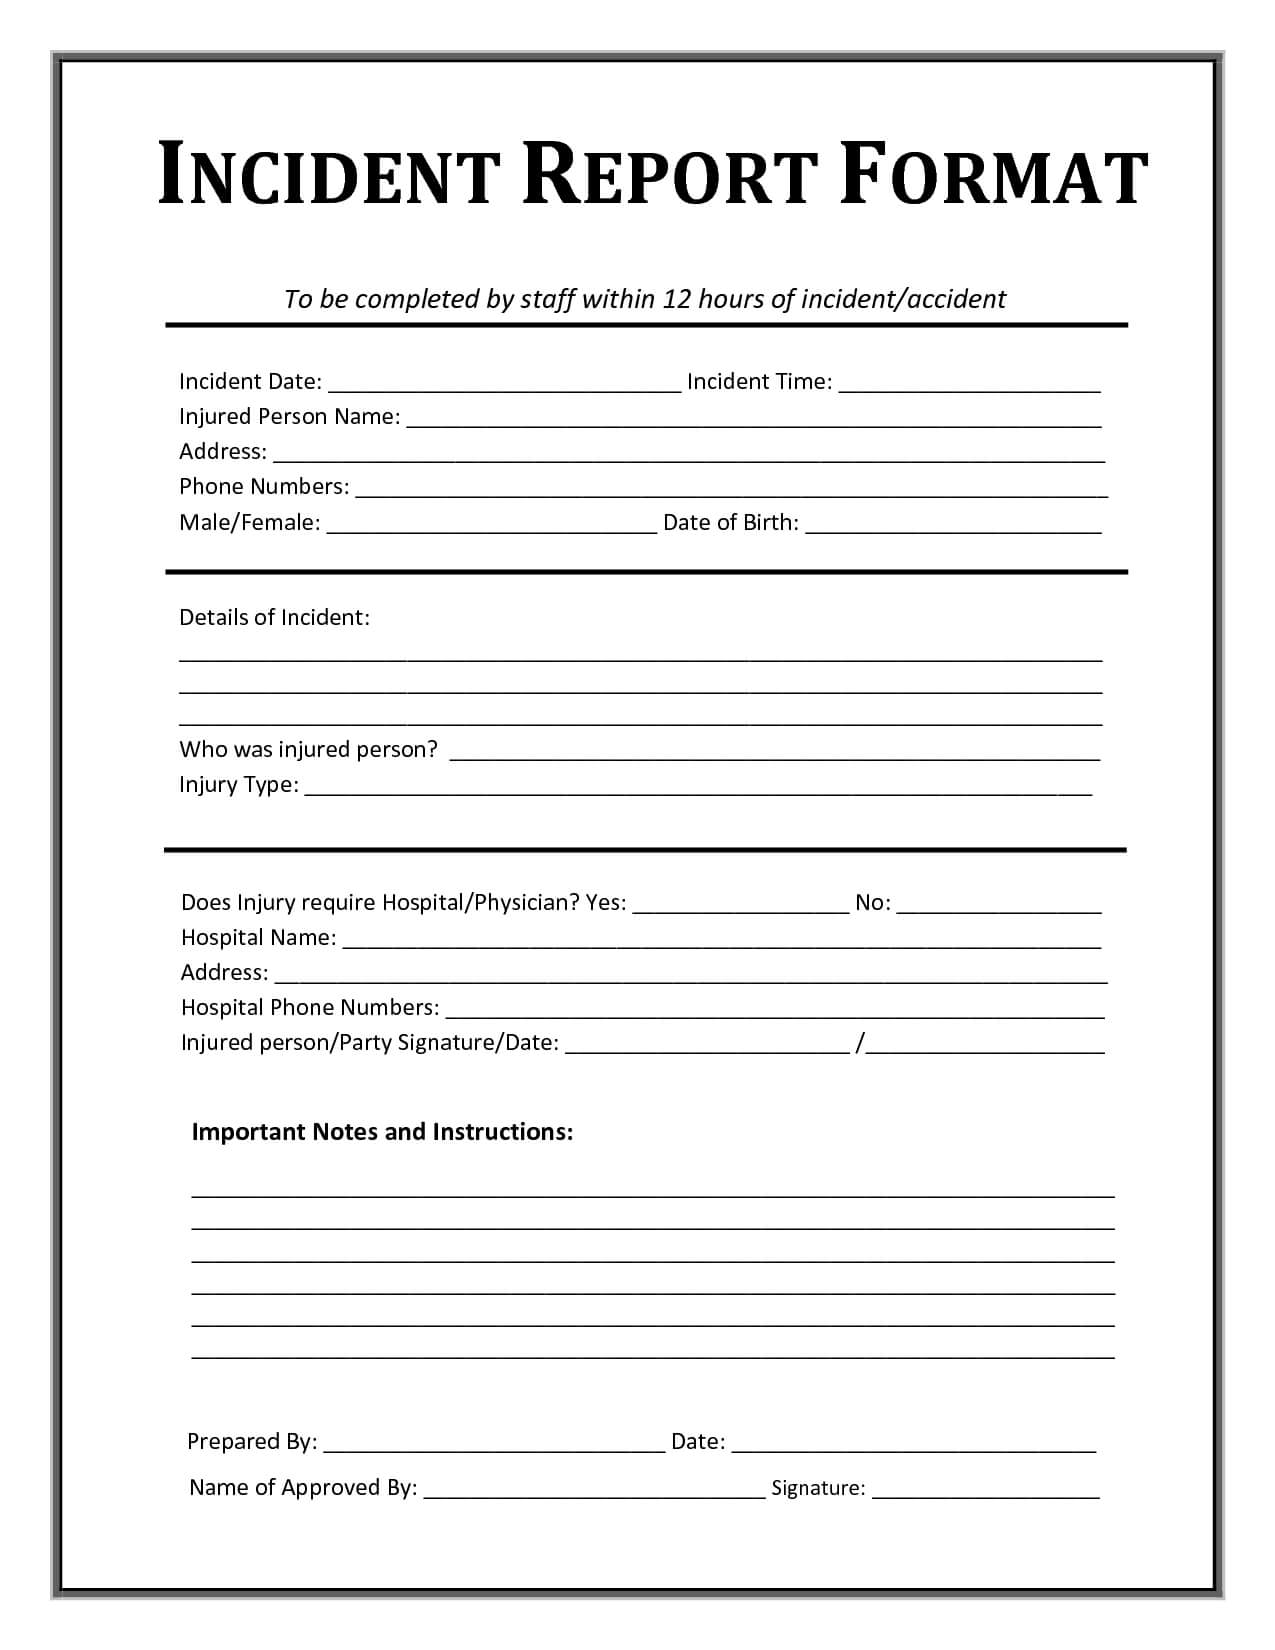 Incident Report Template | Incident Report Form, Incident In Incident Report Log Template